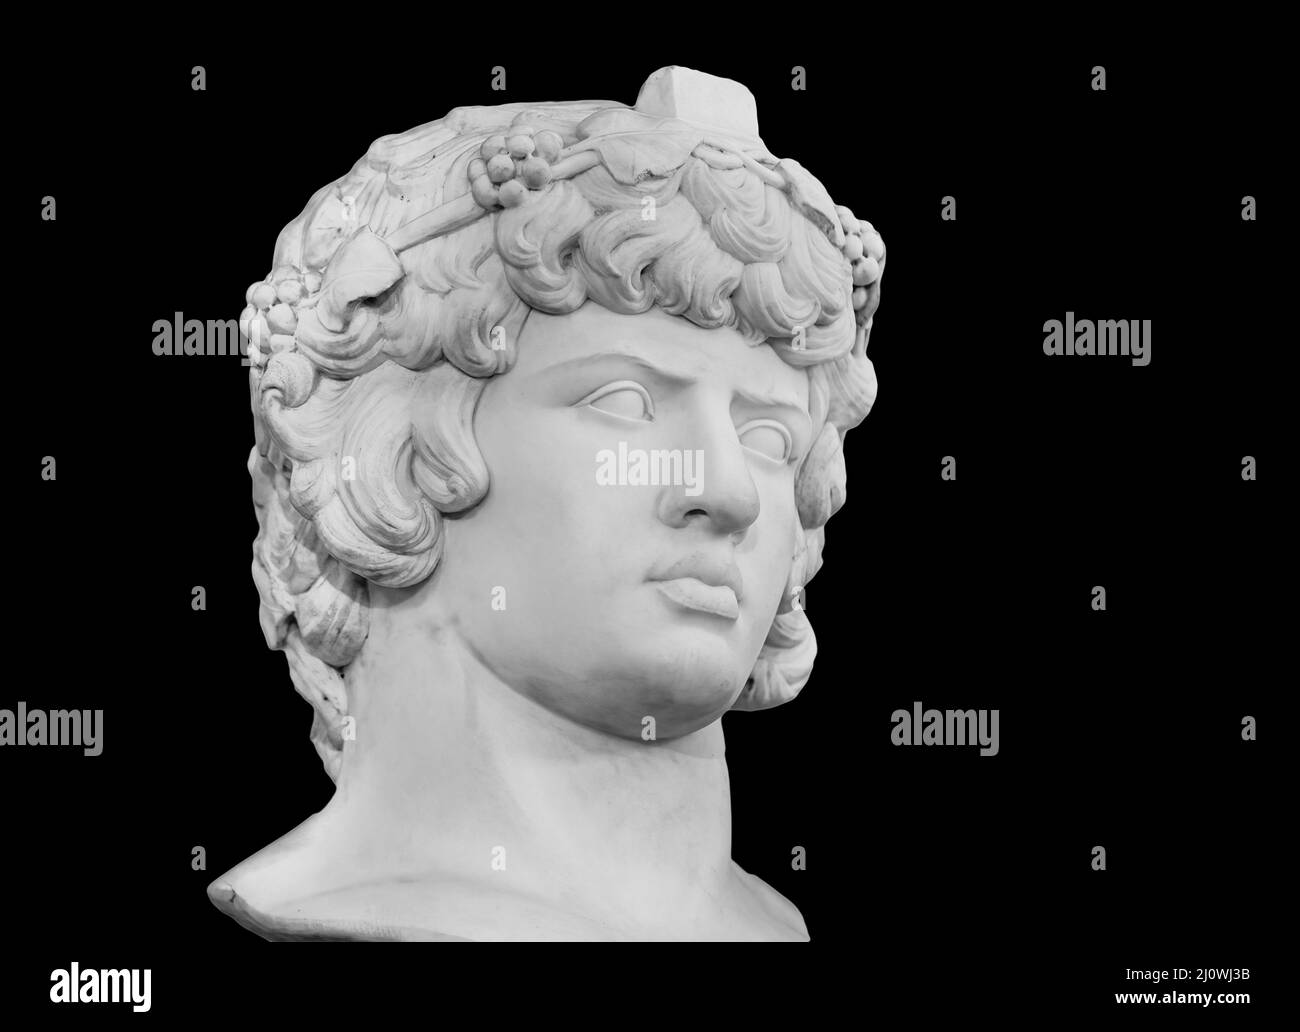 Gypsum copy of famous ancient statue Antinous head isolated on a black background. Plaster antique sculpture young man face. Ren Stock Photo